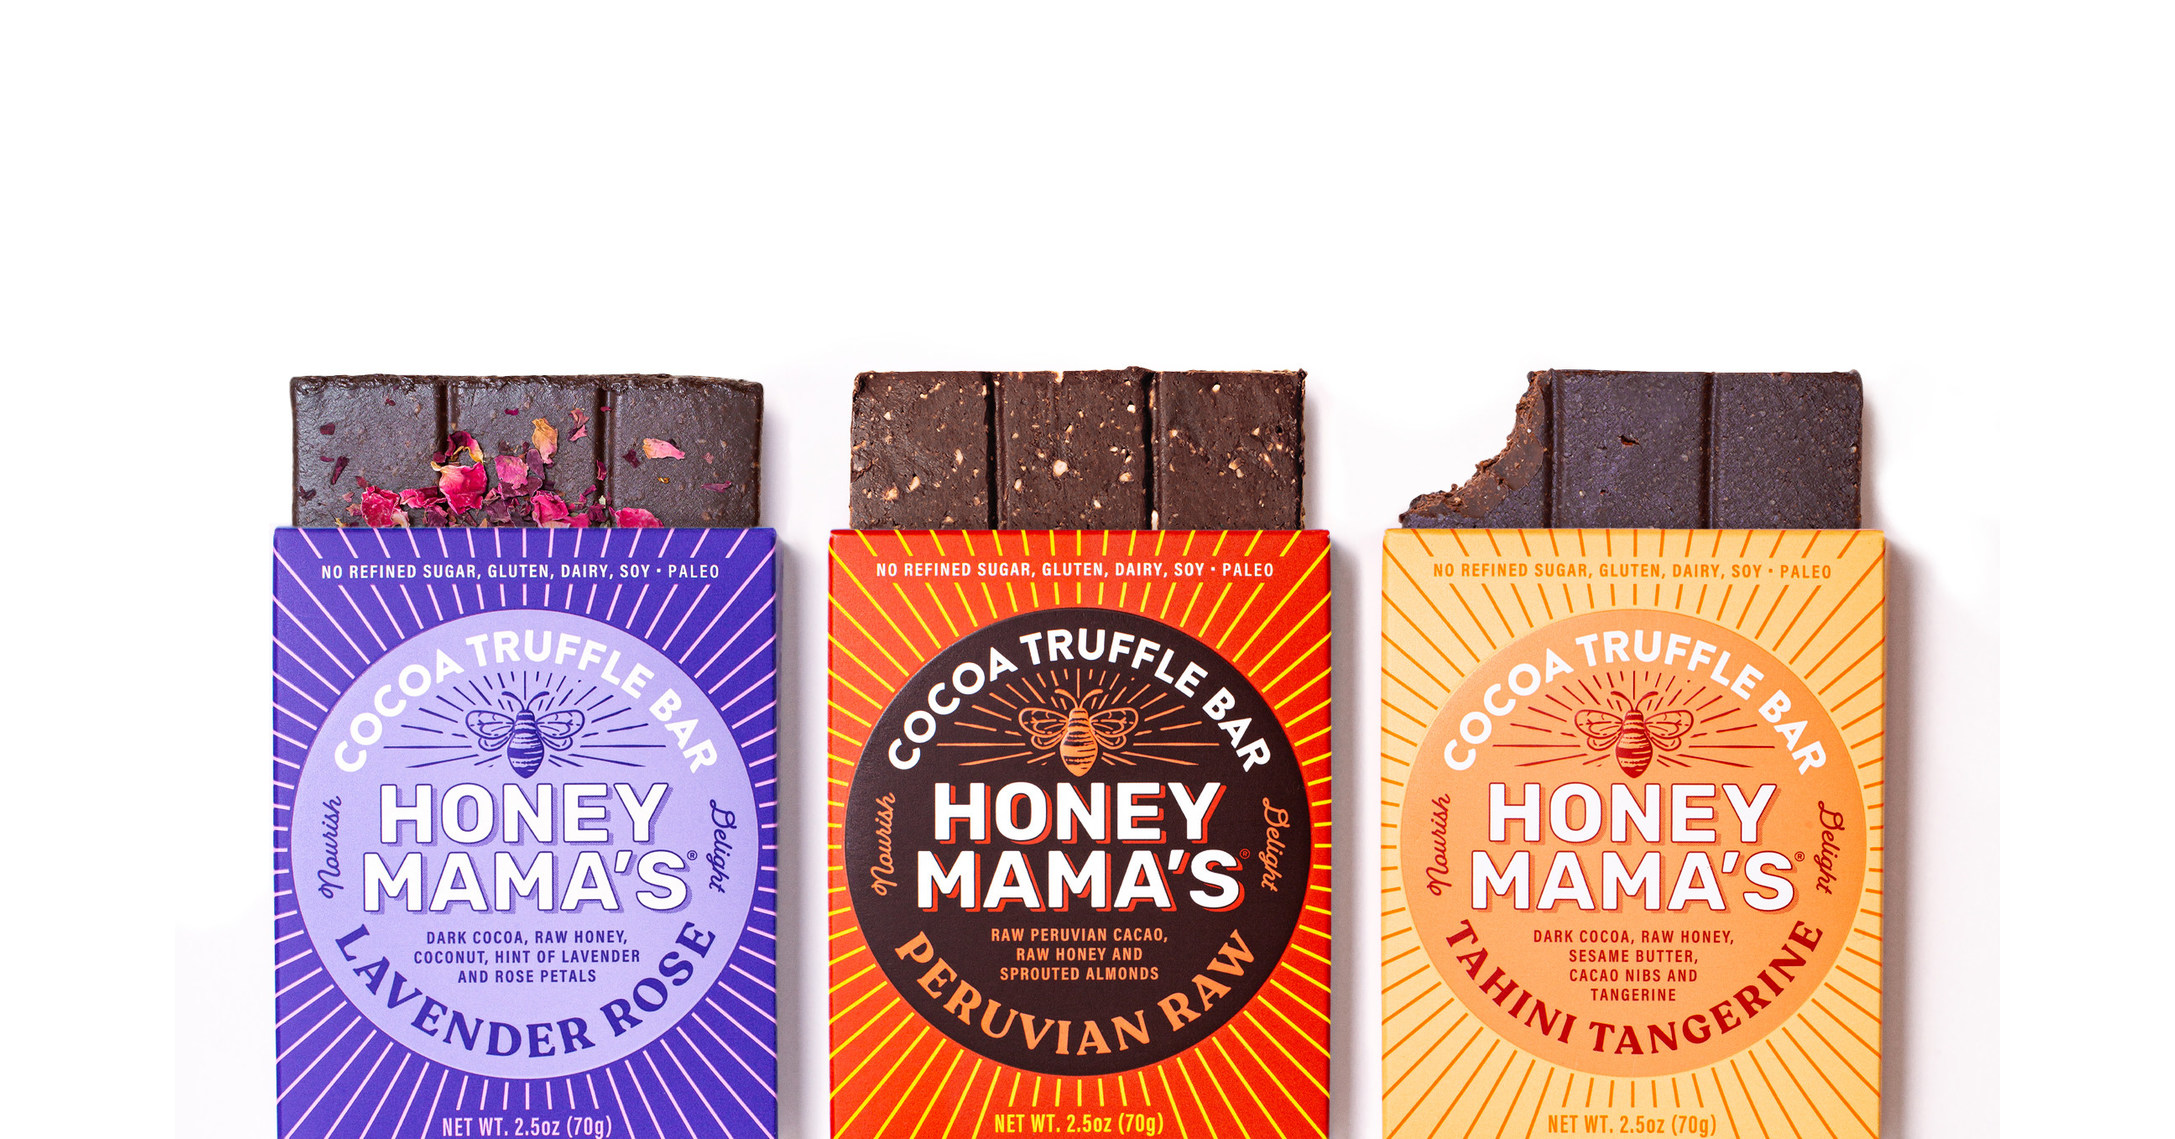 Honey Mama's closes $10.3M Series A with follow on investment from